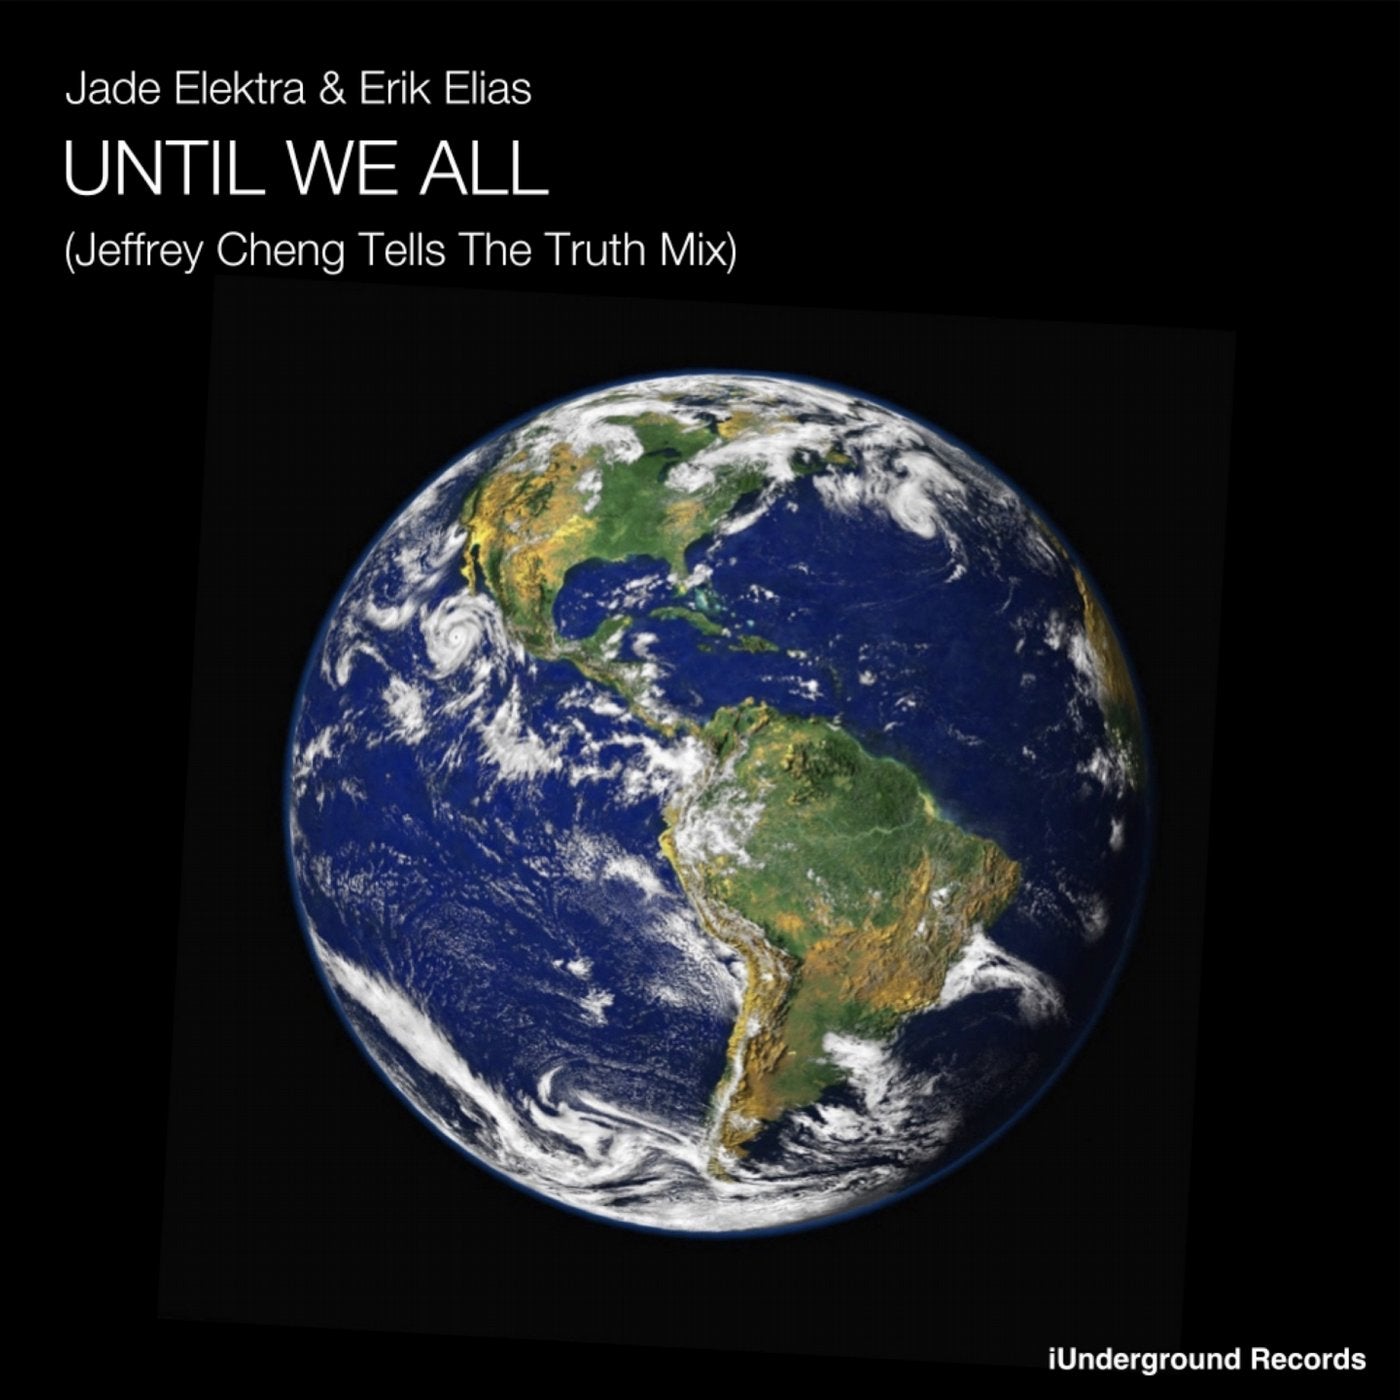 Until We All (Jeffrey Cheng Tells the Truth Mix)